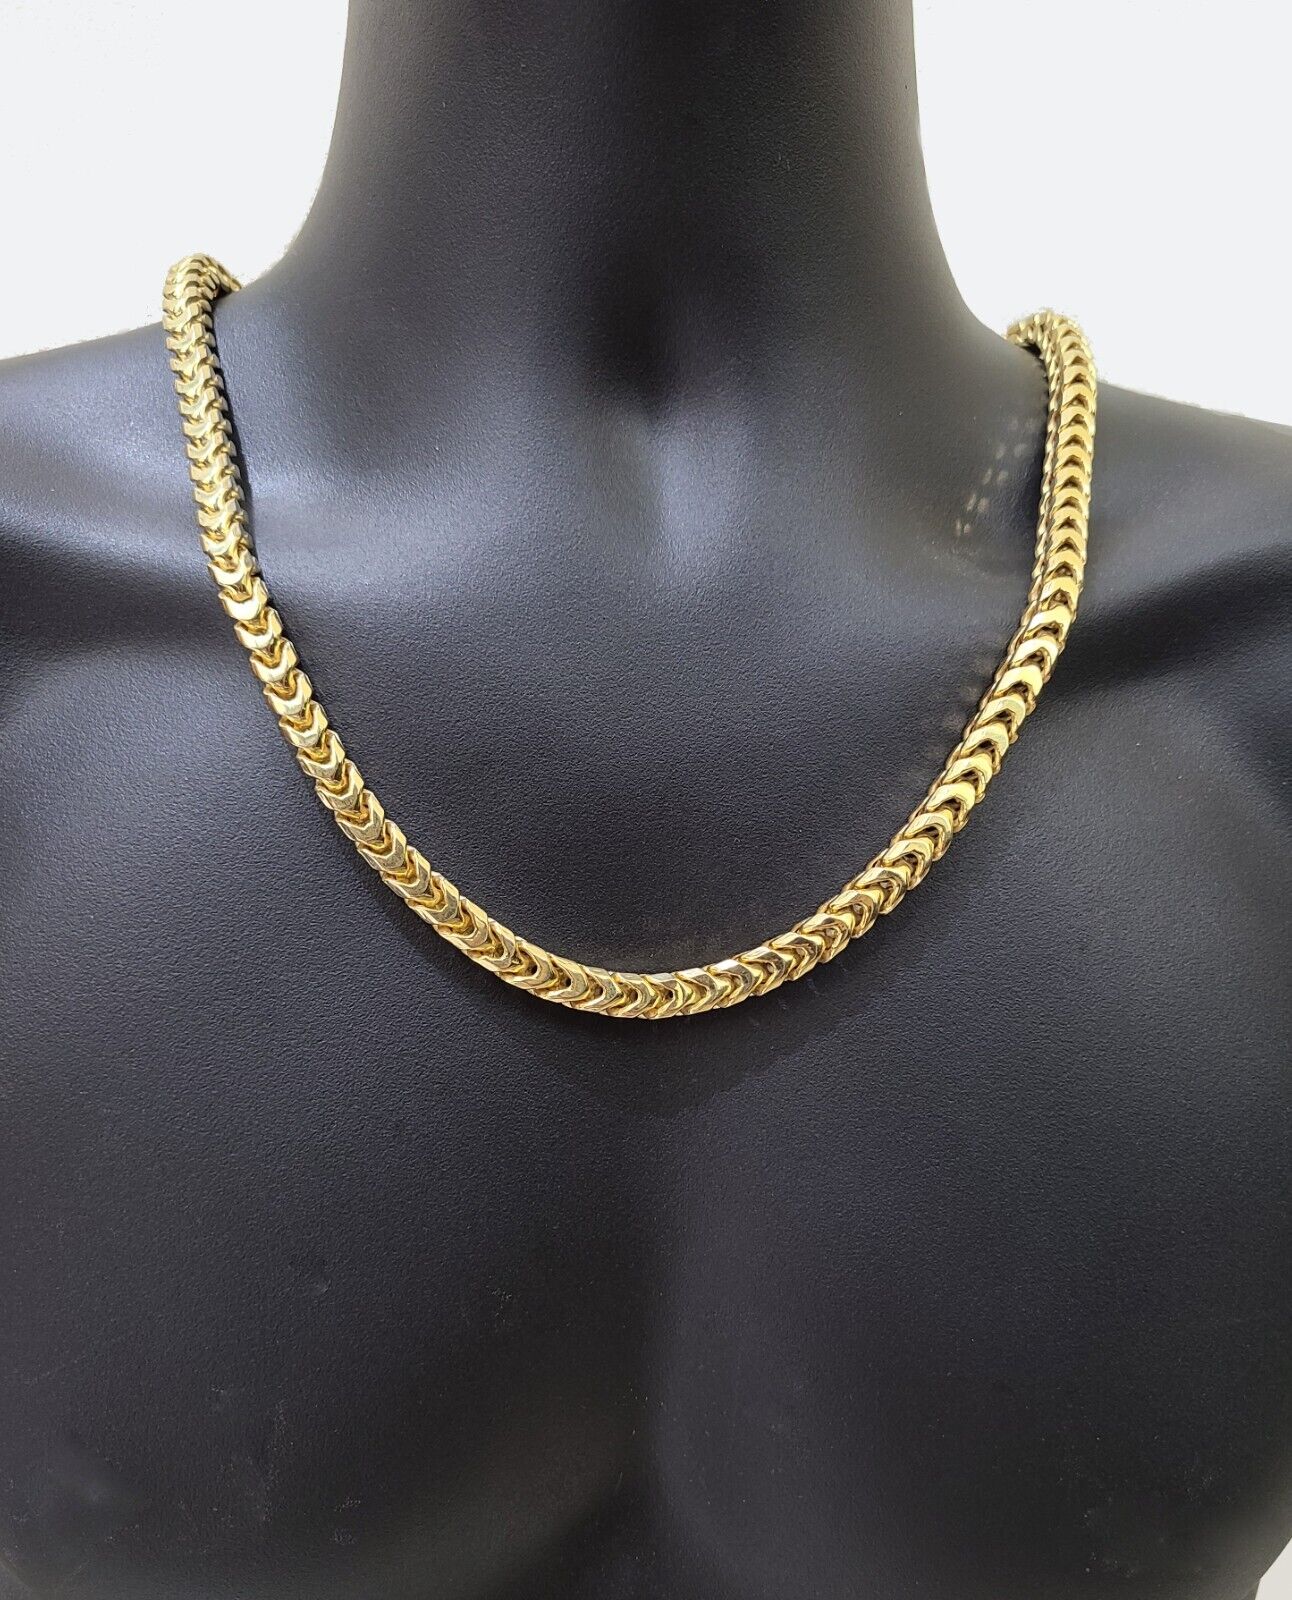 Memoir Gold plated Super Long 26 Inch, 4mm thick, 26 Gms, Rope design  Fashion Chain necklace Men women : Amazon.in: Fashion